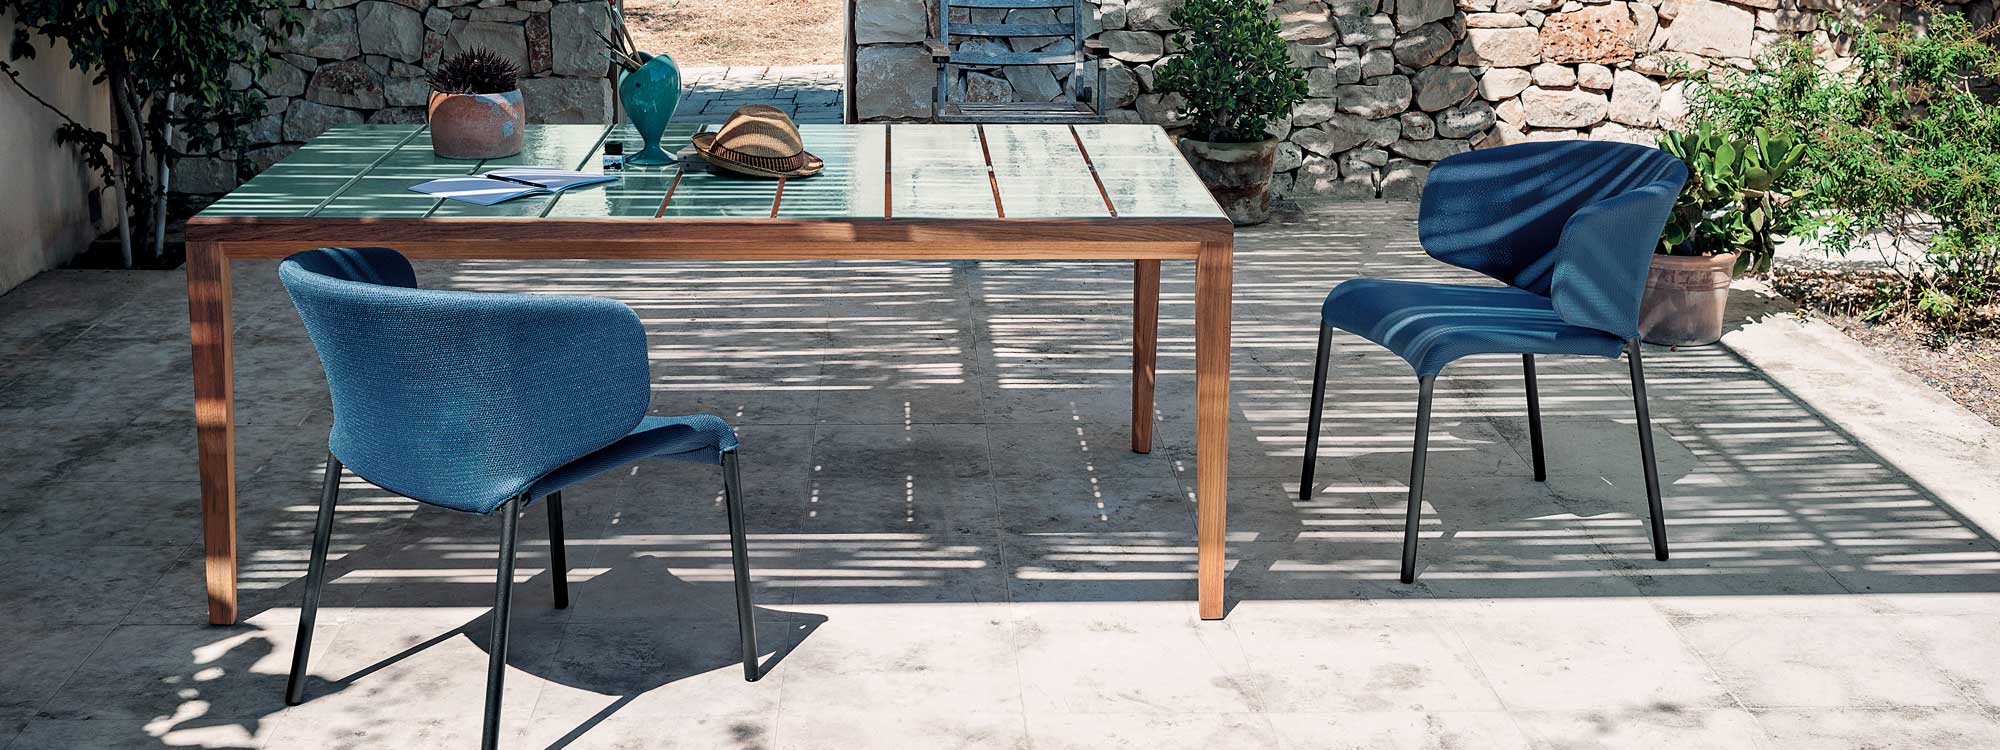 Image of RODA Teka teak dining table with top in slats of glazed ceramic, next to Double upholstered garden chairs in blue fabric.